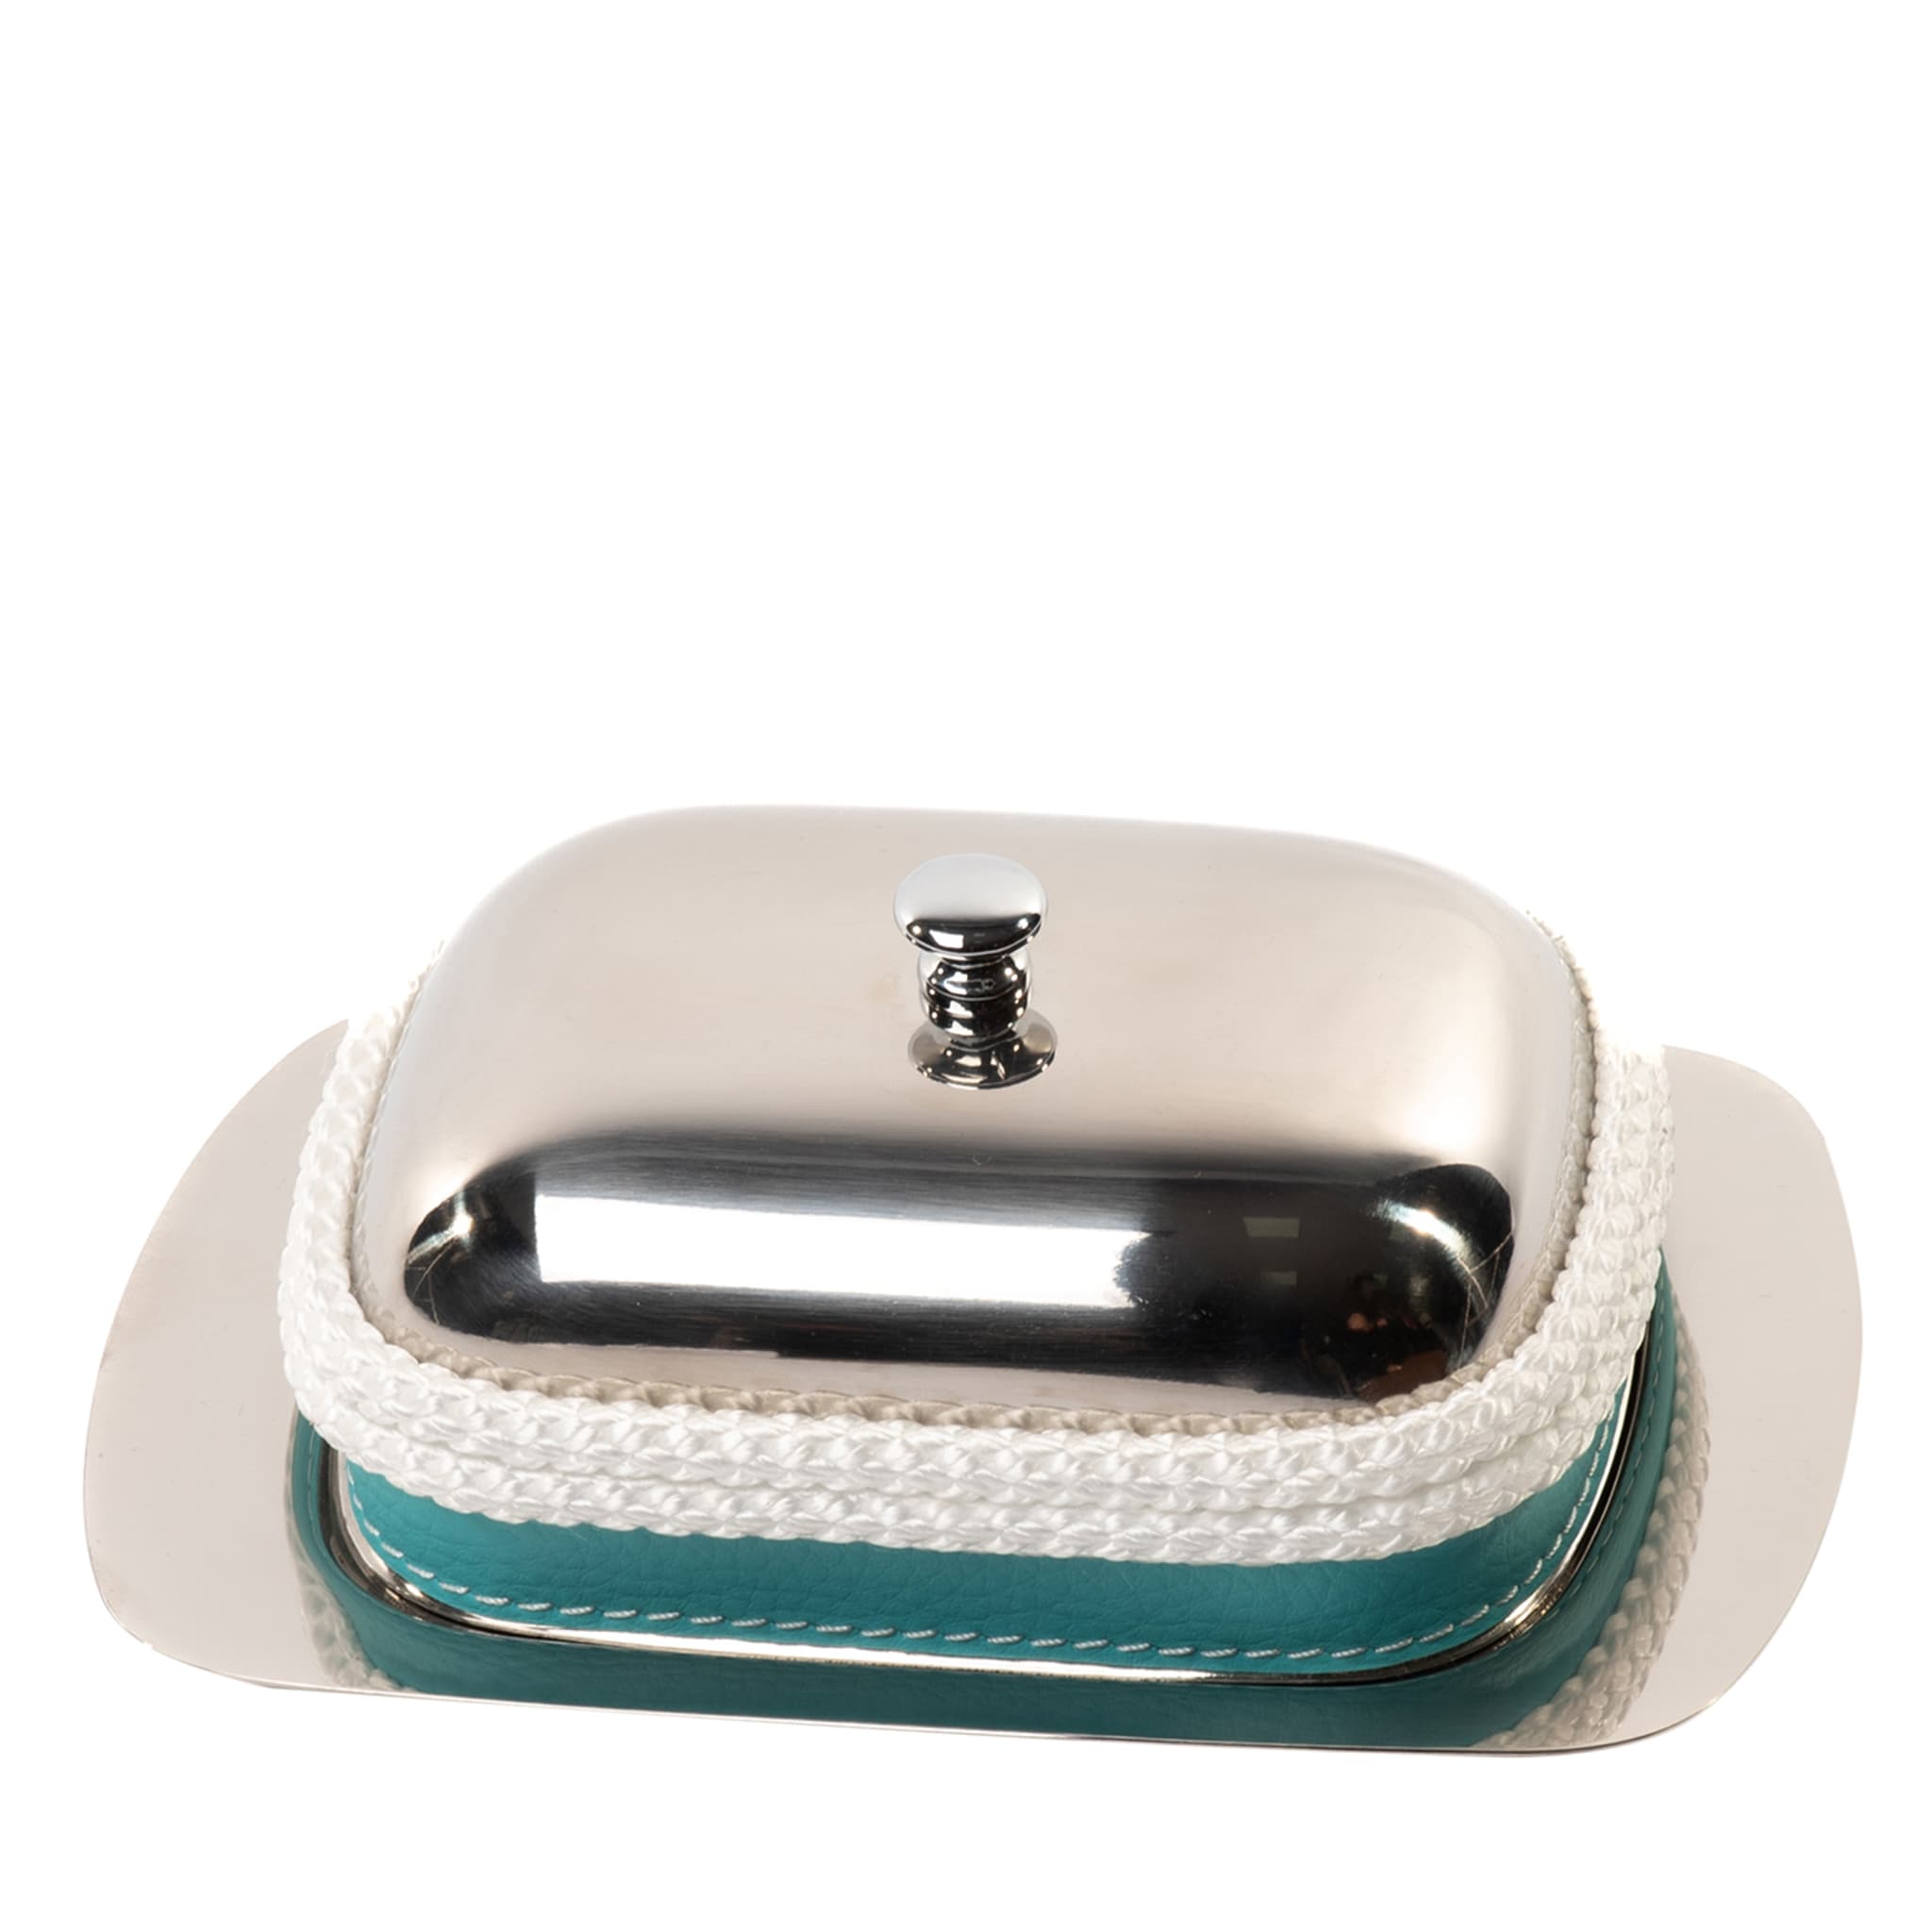 Turquoise & White Butter Dish with Lid - Main view